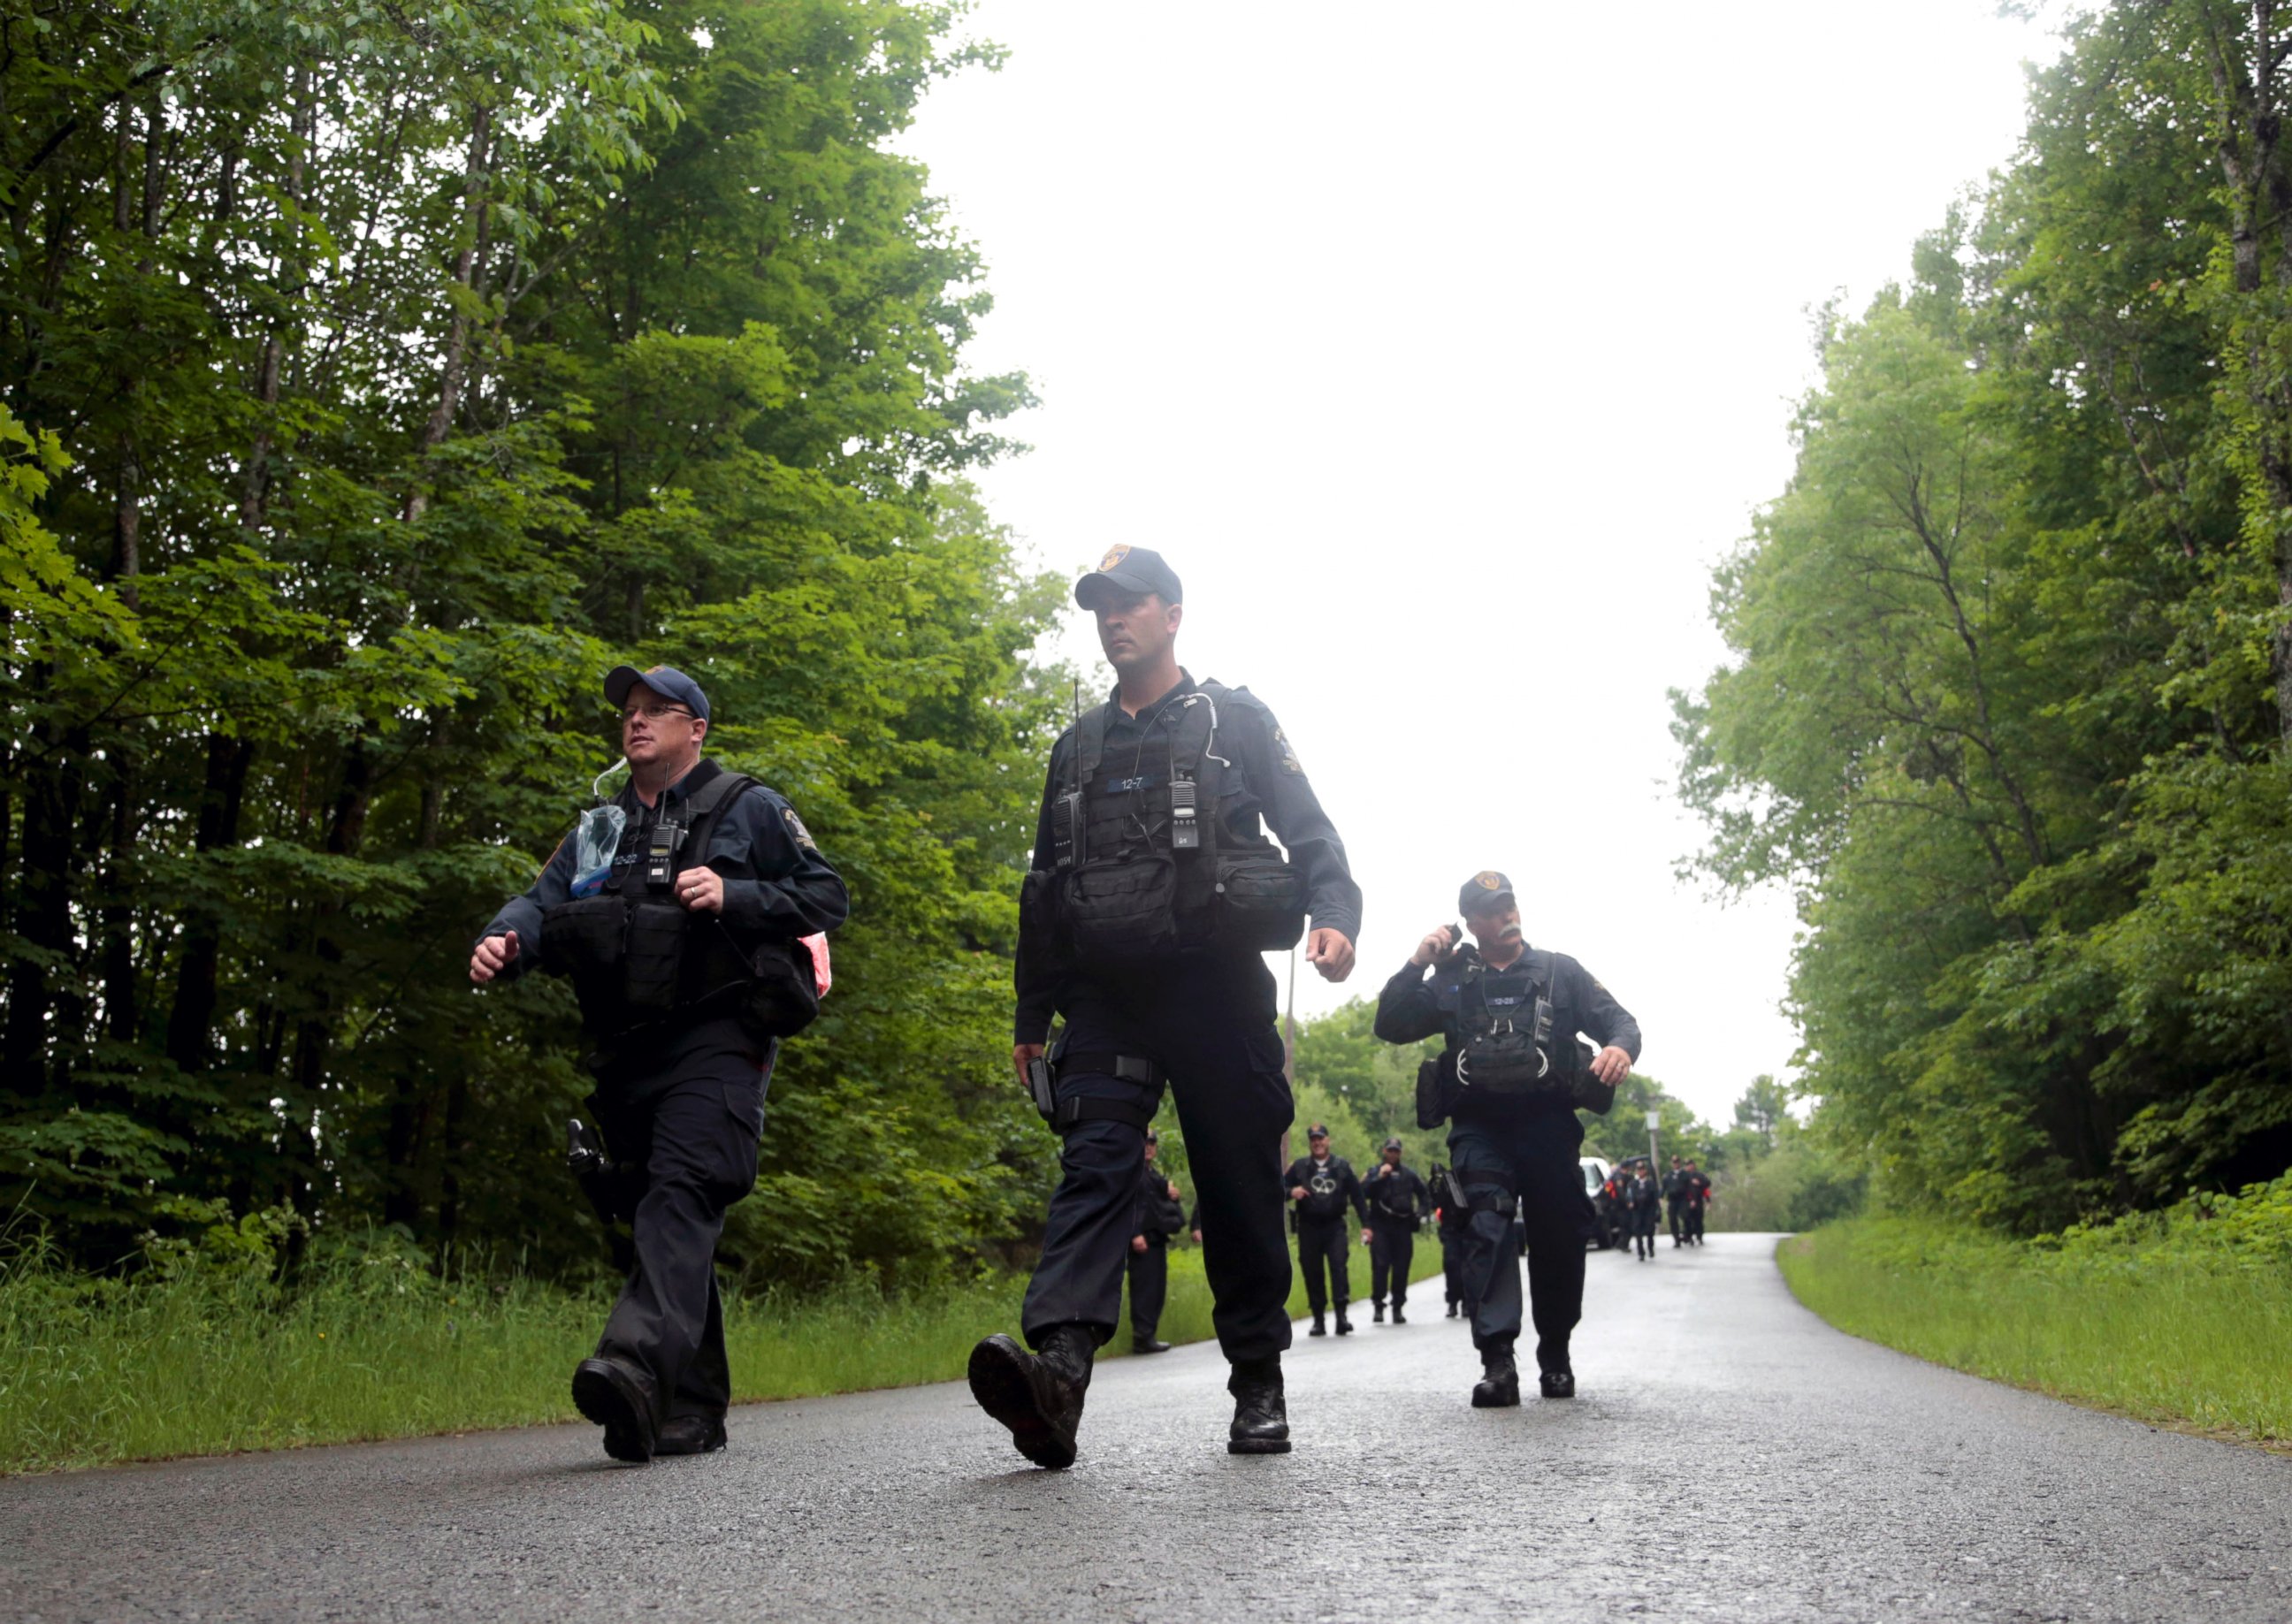 PHOTO: Corrections officers walk along a road after leaving a wooded area while searching for two prison escapees from Clinton Correctional Facility in Dannemora, June 23, 2015, in Owls Head, N.Y.